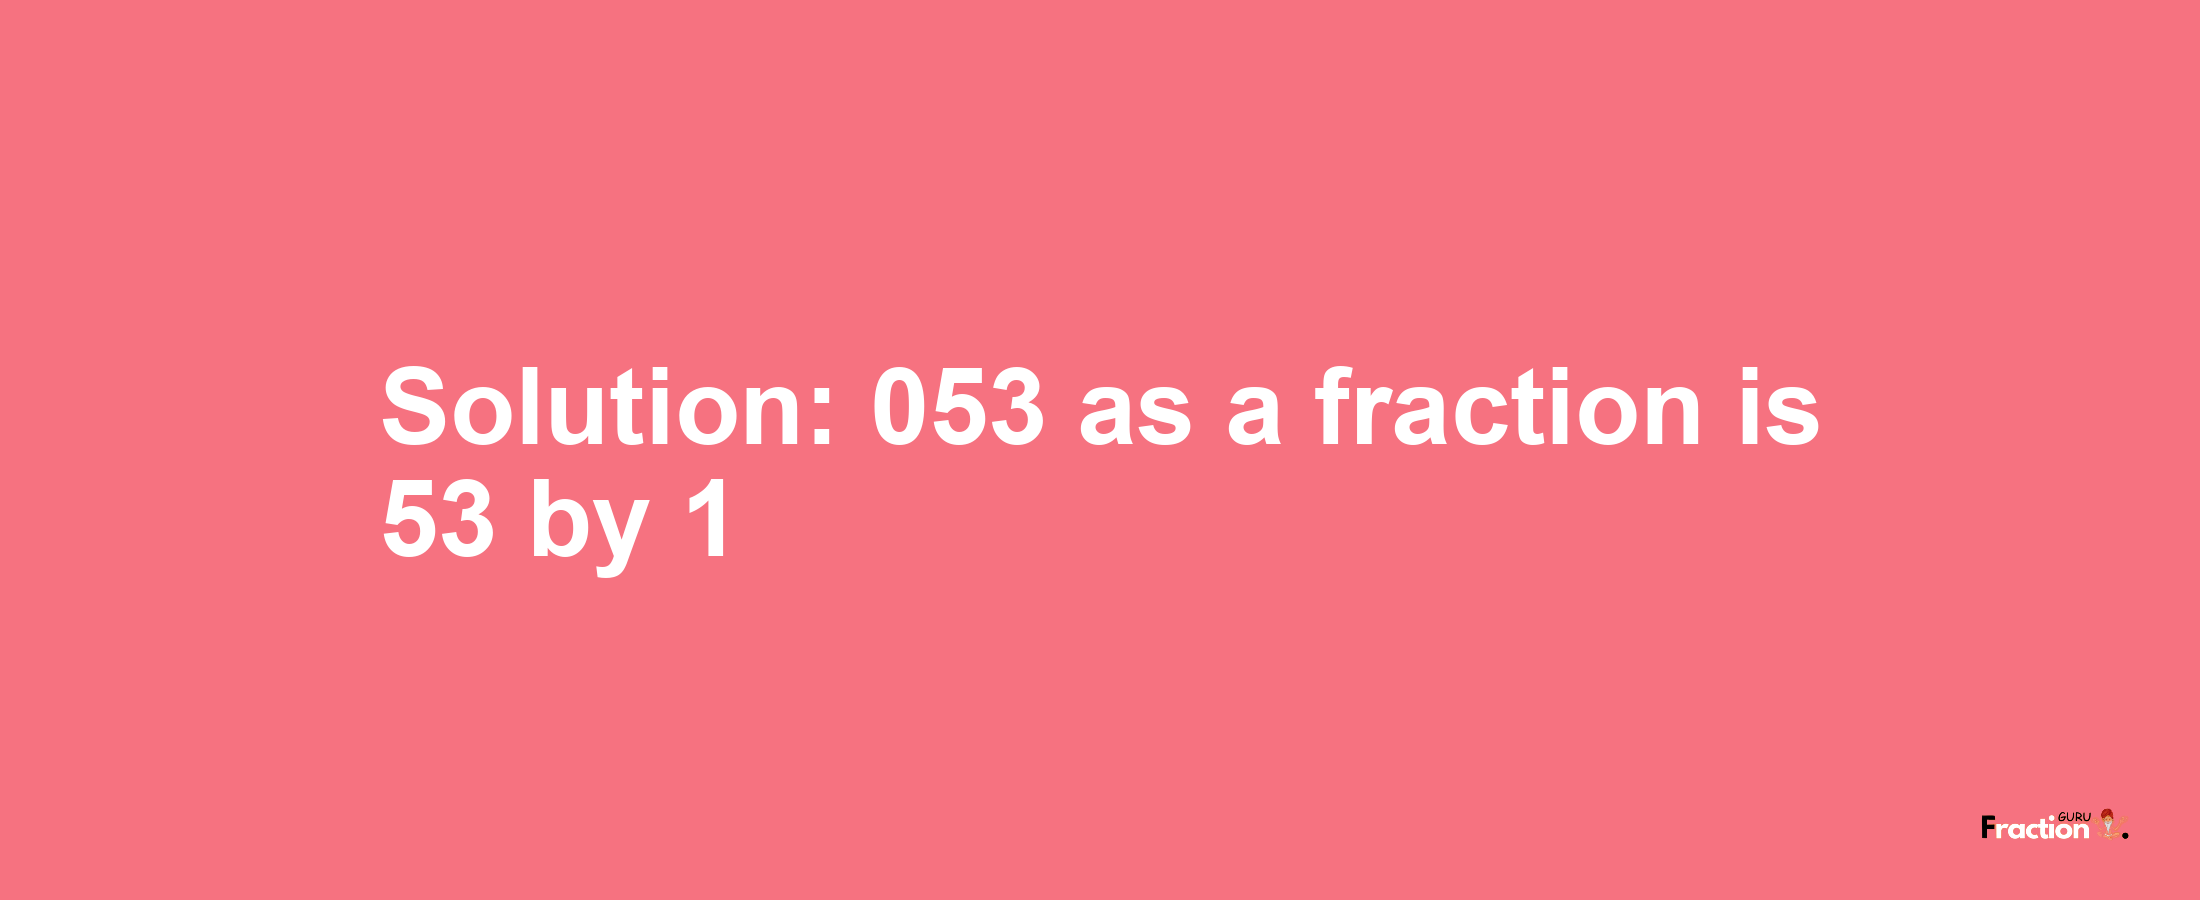 Solution:053 as a fraction is 53/1